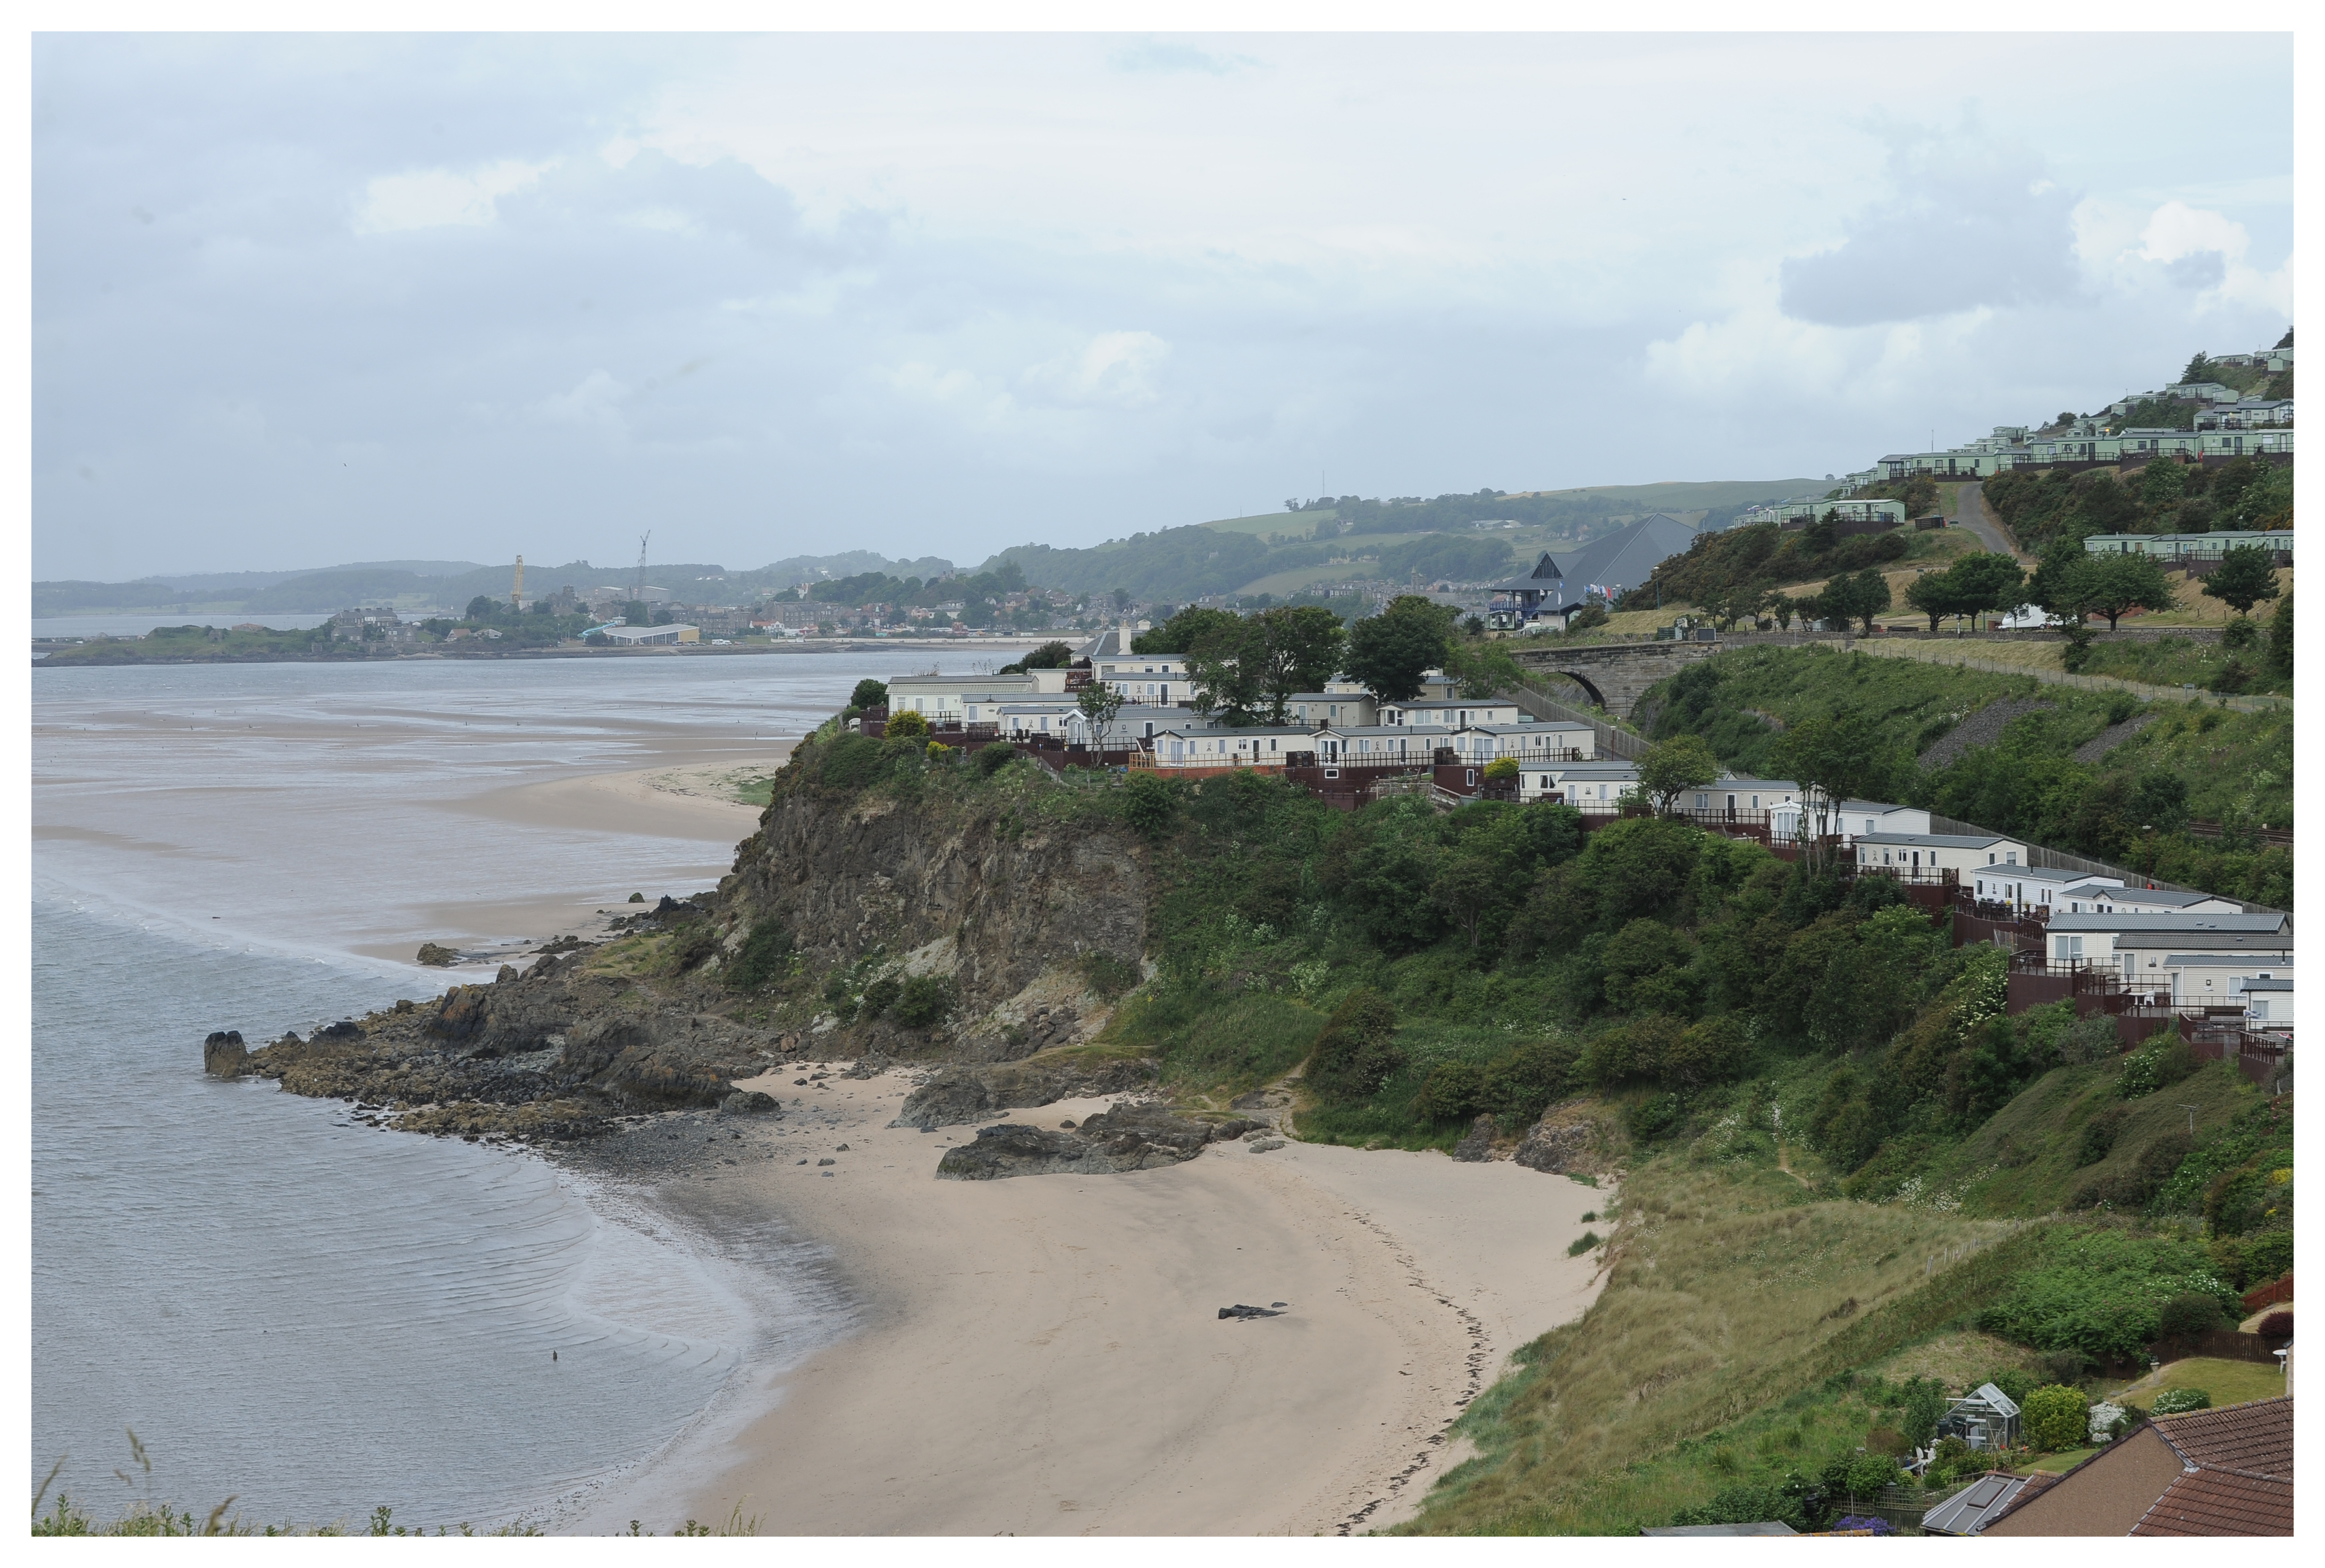 Pettycur Bay, Kinghorn, where police have targeted Illegal shellfish rustling.